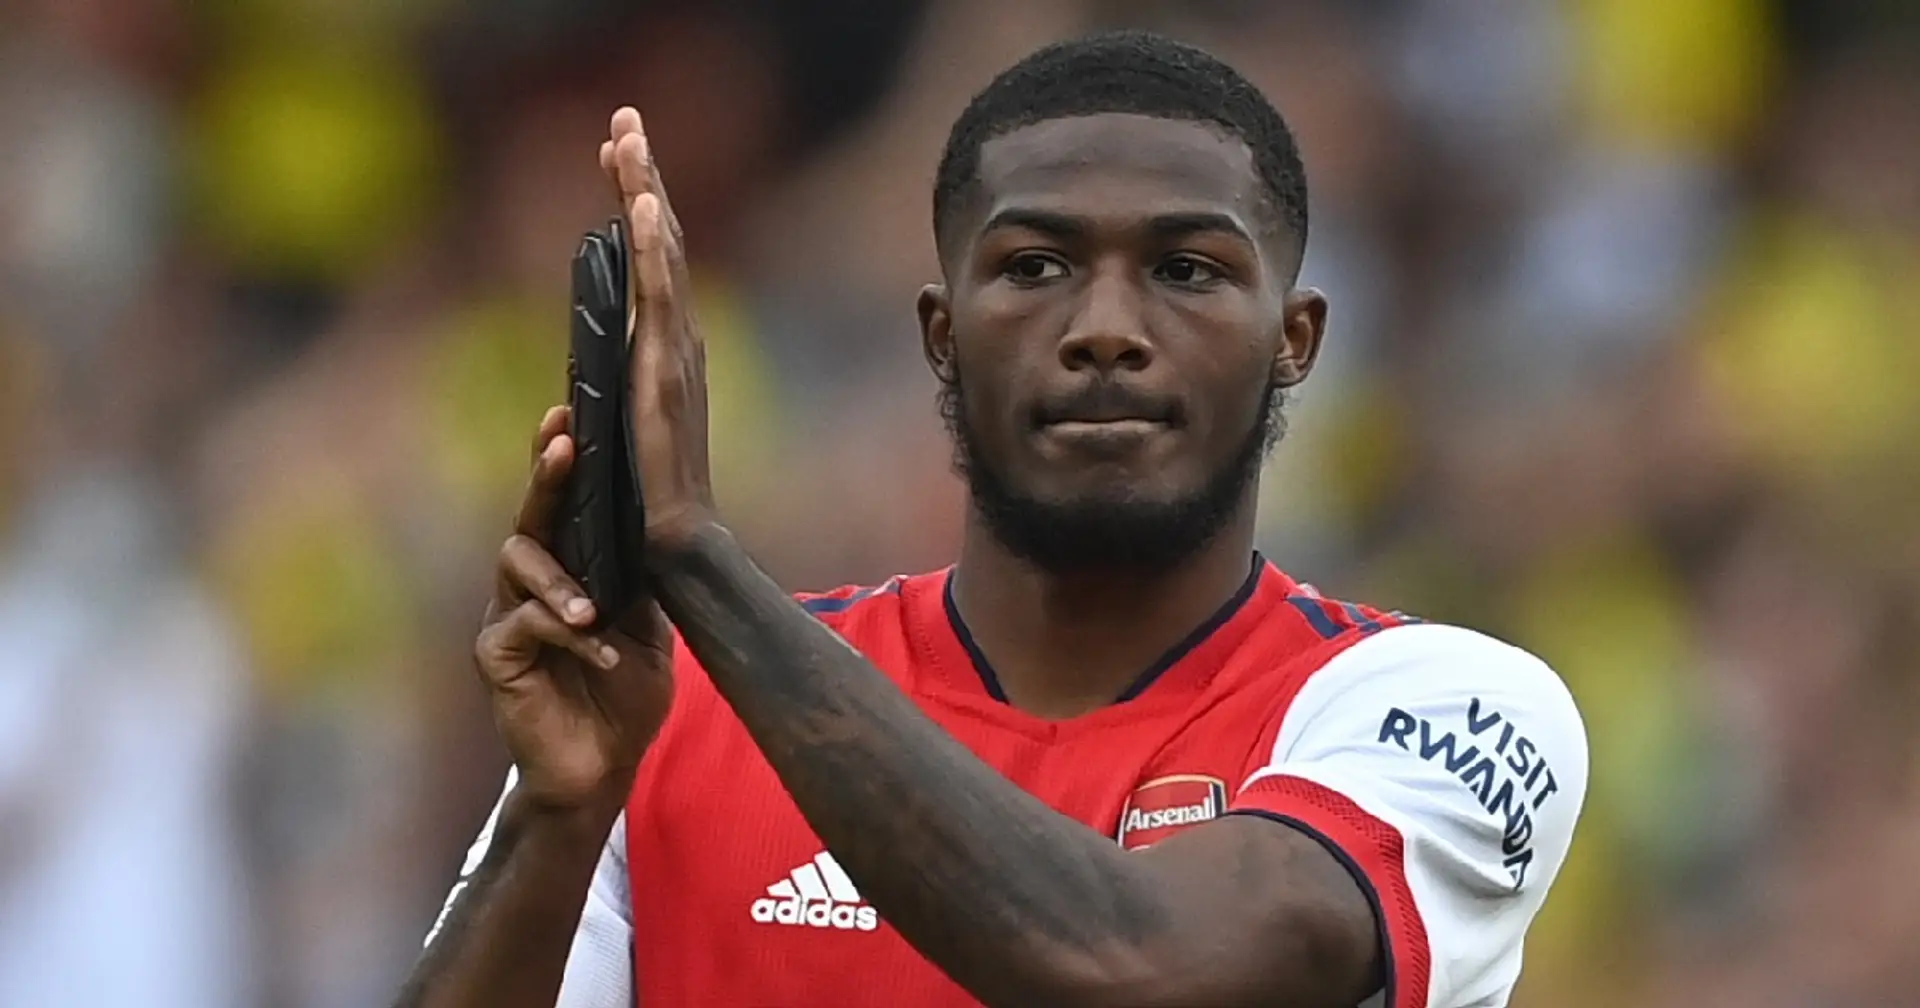 Maitland-Niles confirms Arsenal exit after 20 years at the club